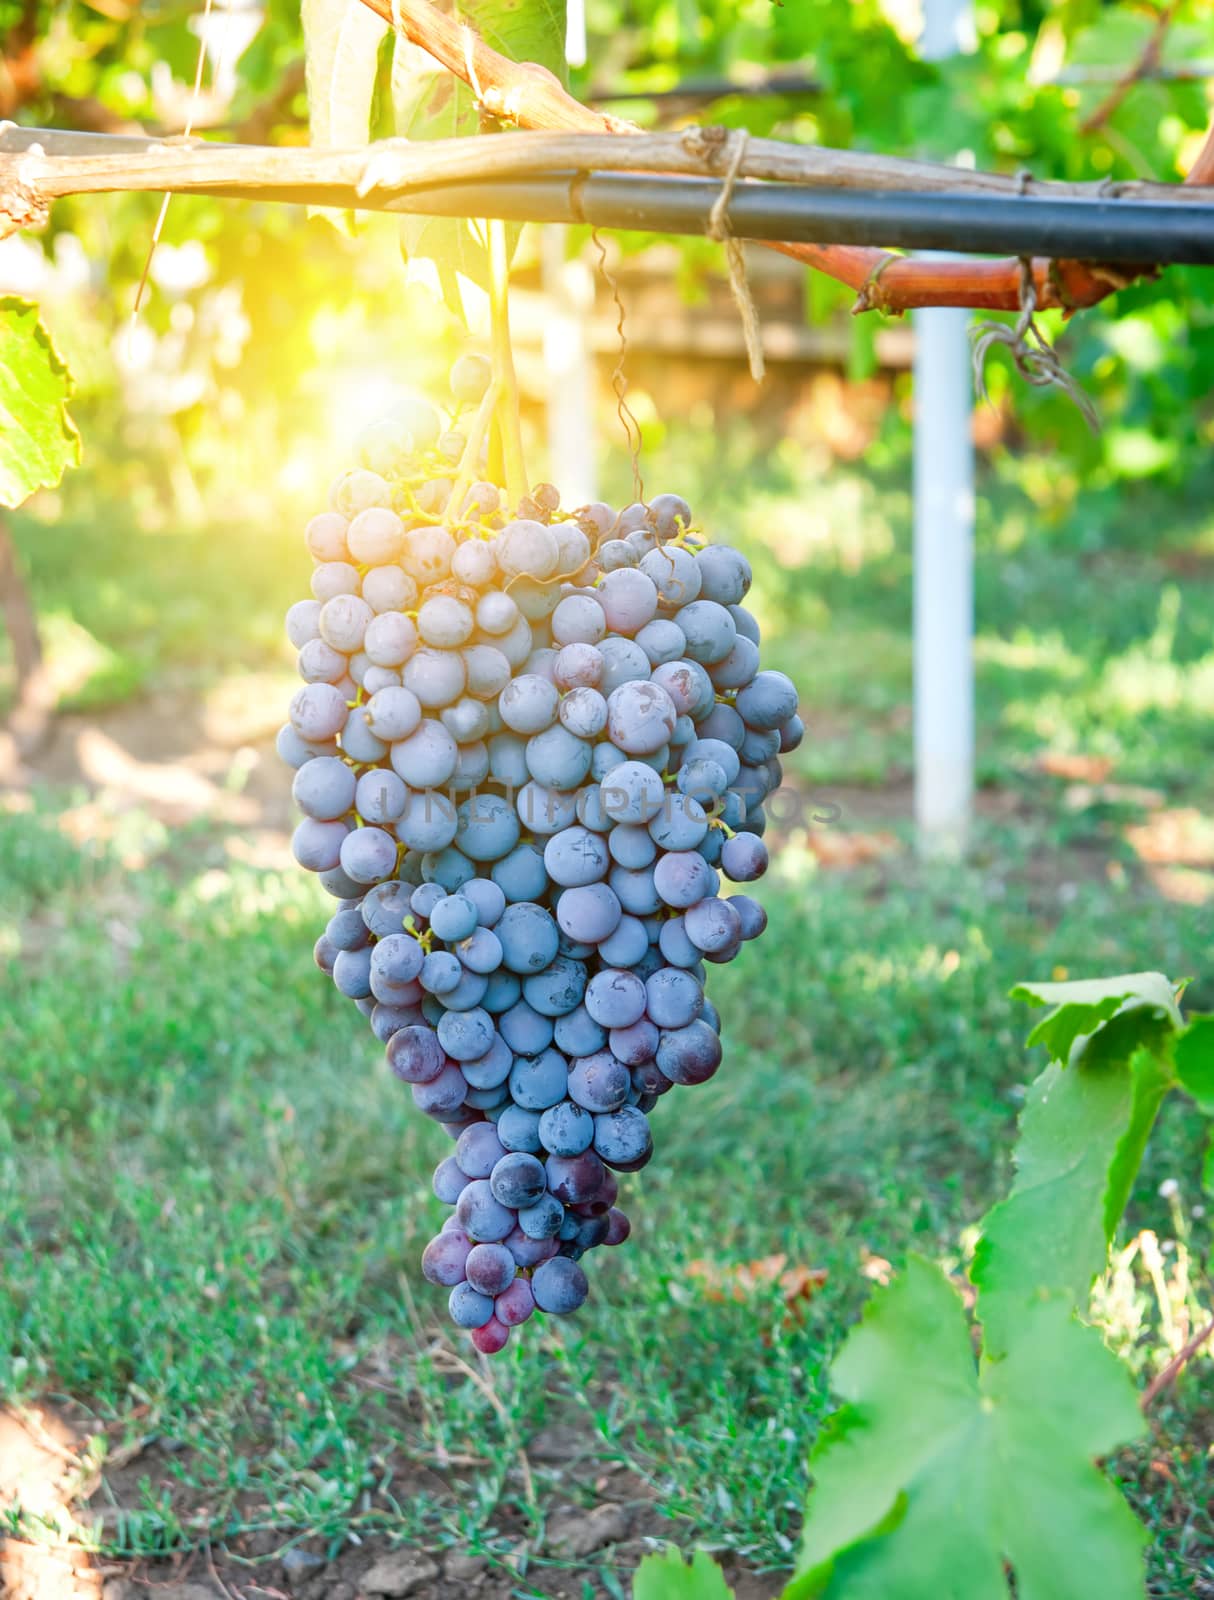 Ripening grape clusters on the vine, bright rays of the sun